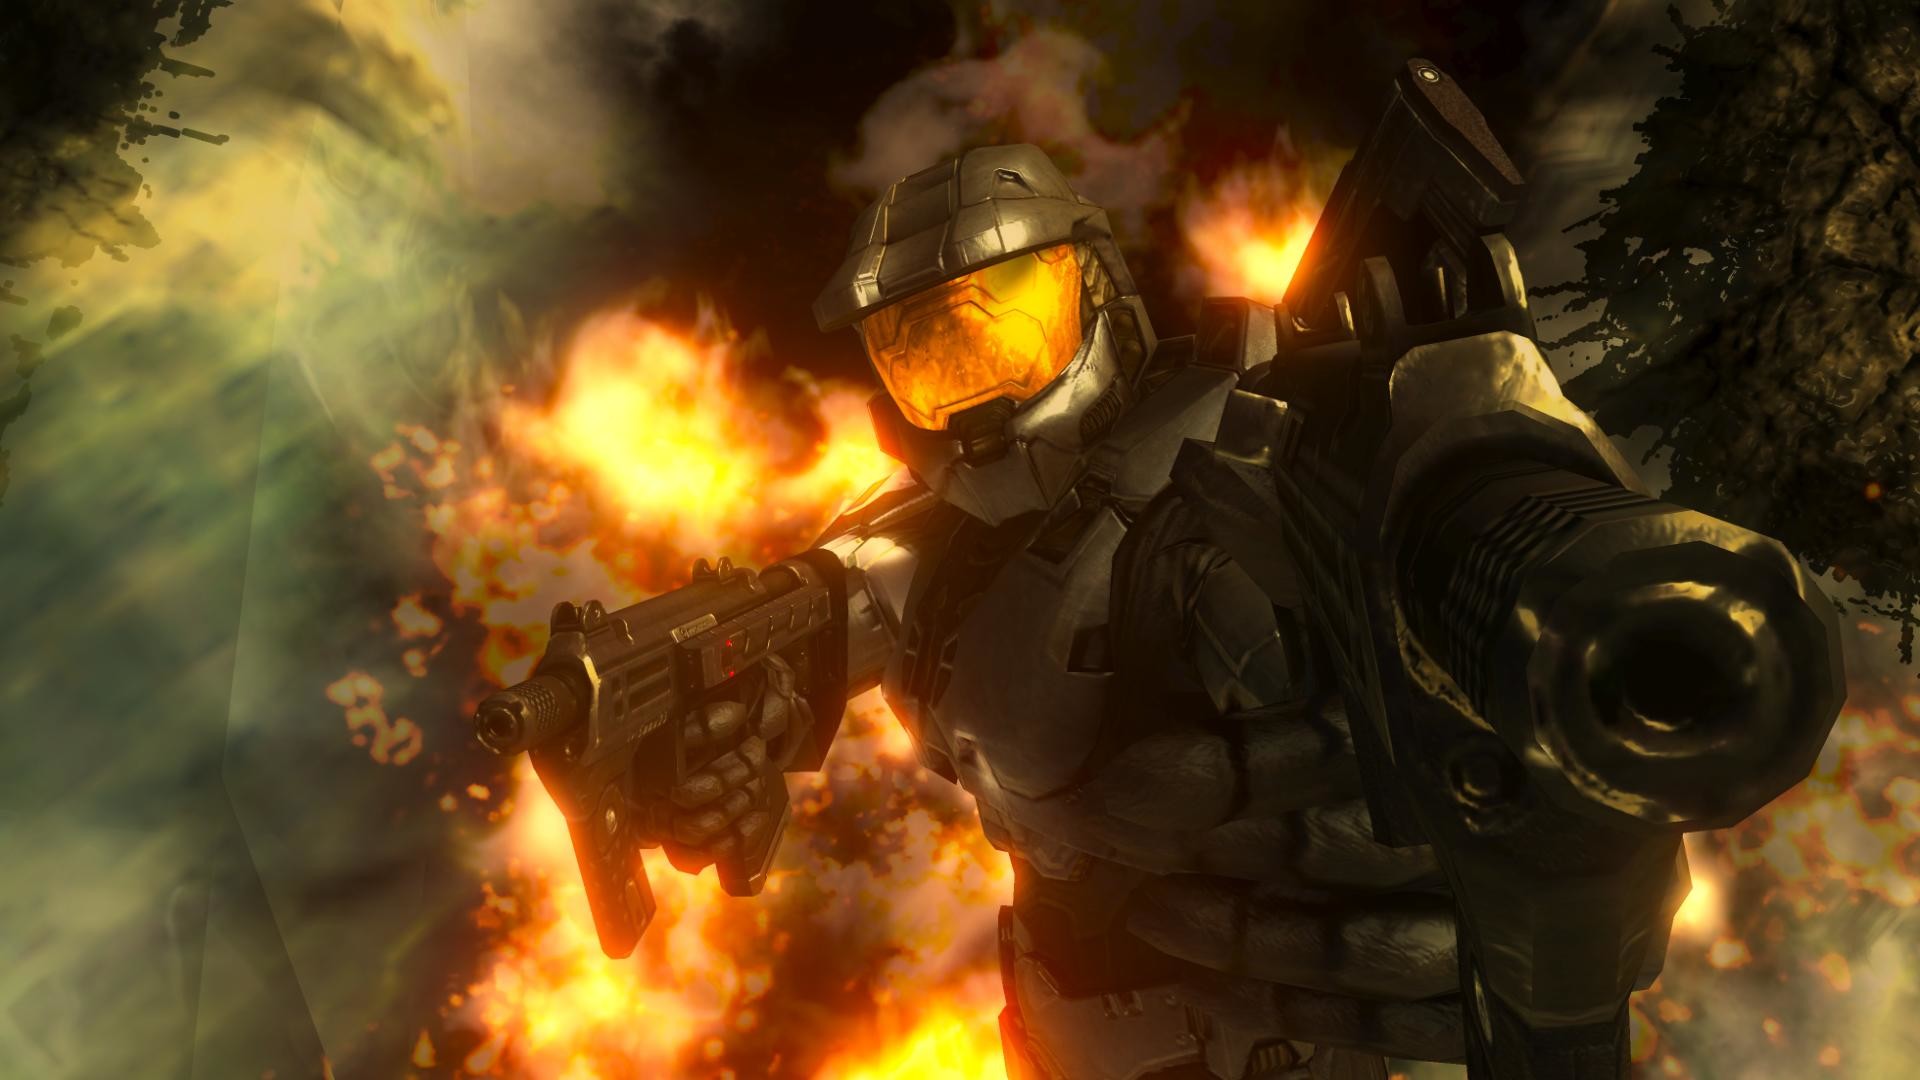 1920x1080 High Resolution Halo 3 Master Chief Wallpaper HD 5 Game Full Size .